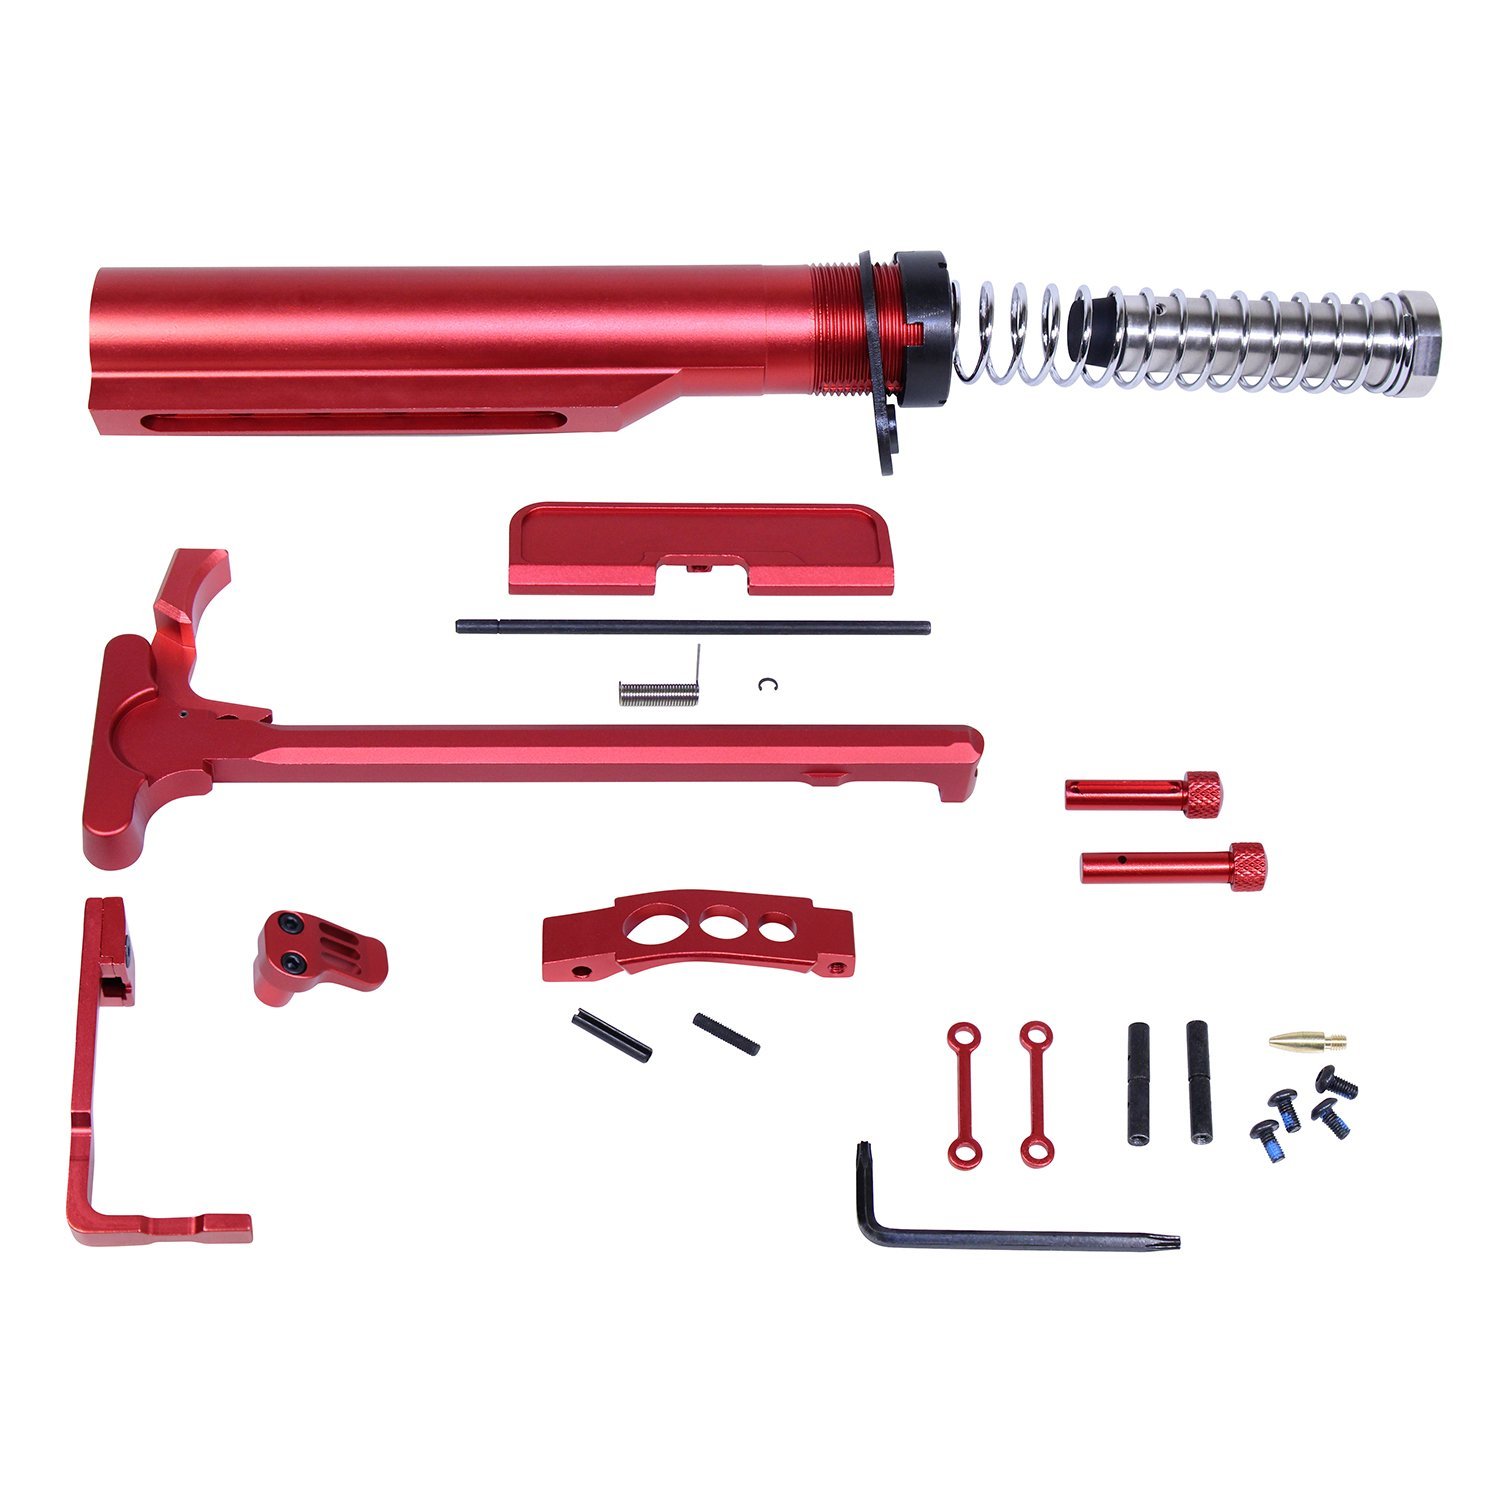 AR-15 Compete Accessory Kit in Anodized Red